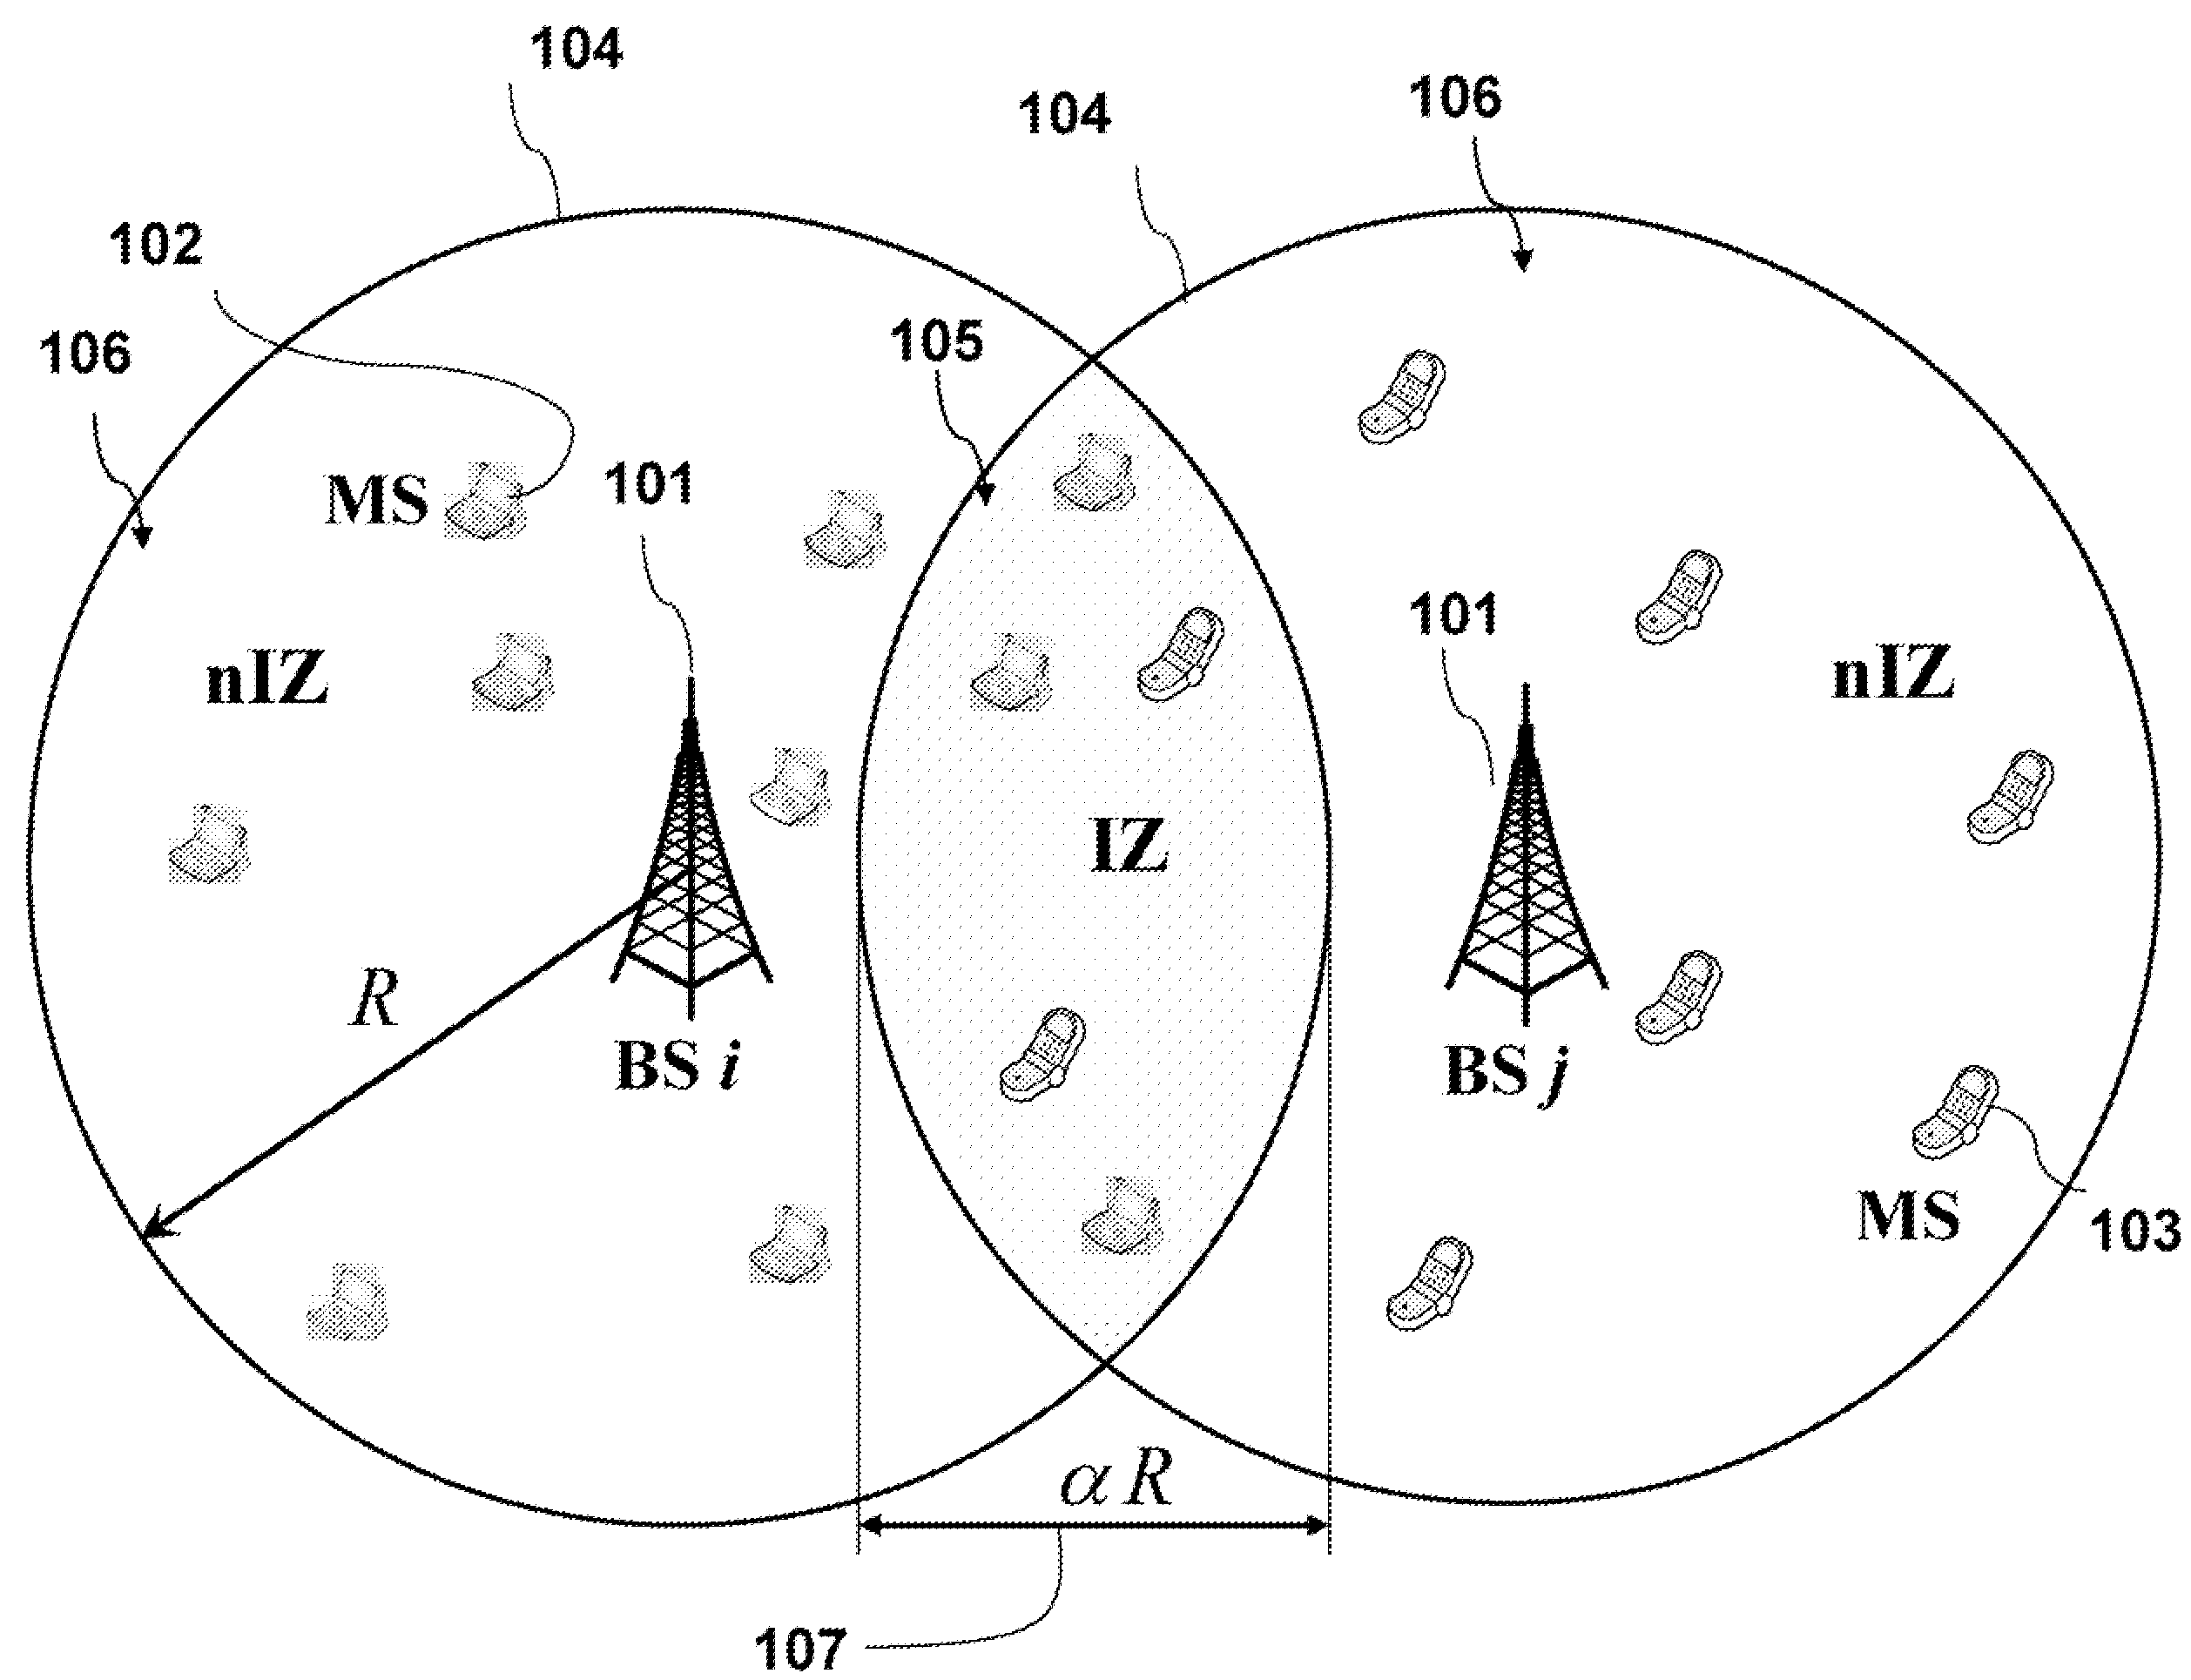 Method for Reducing Inter-Cell Interference in Wireless OFDMA Networks